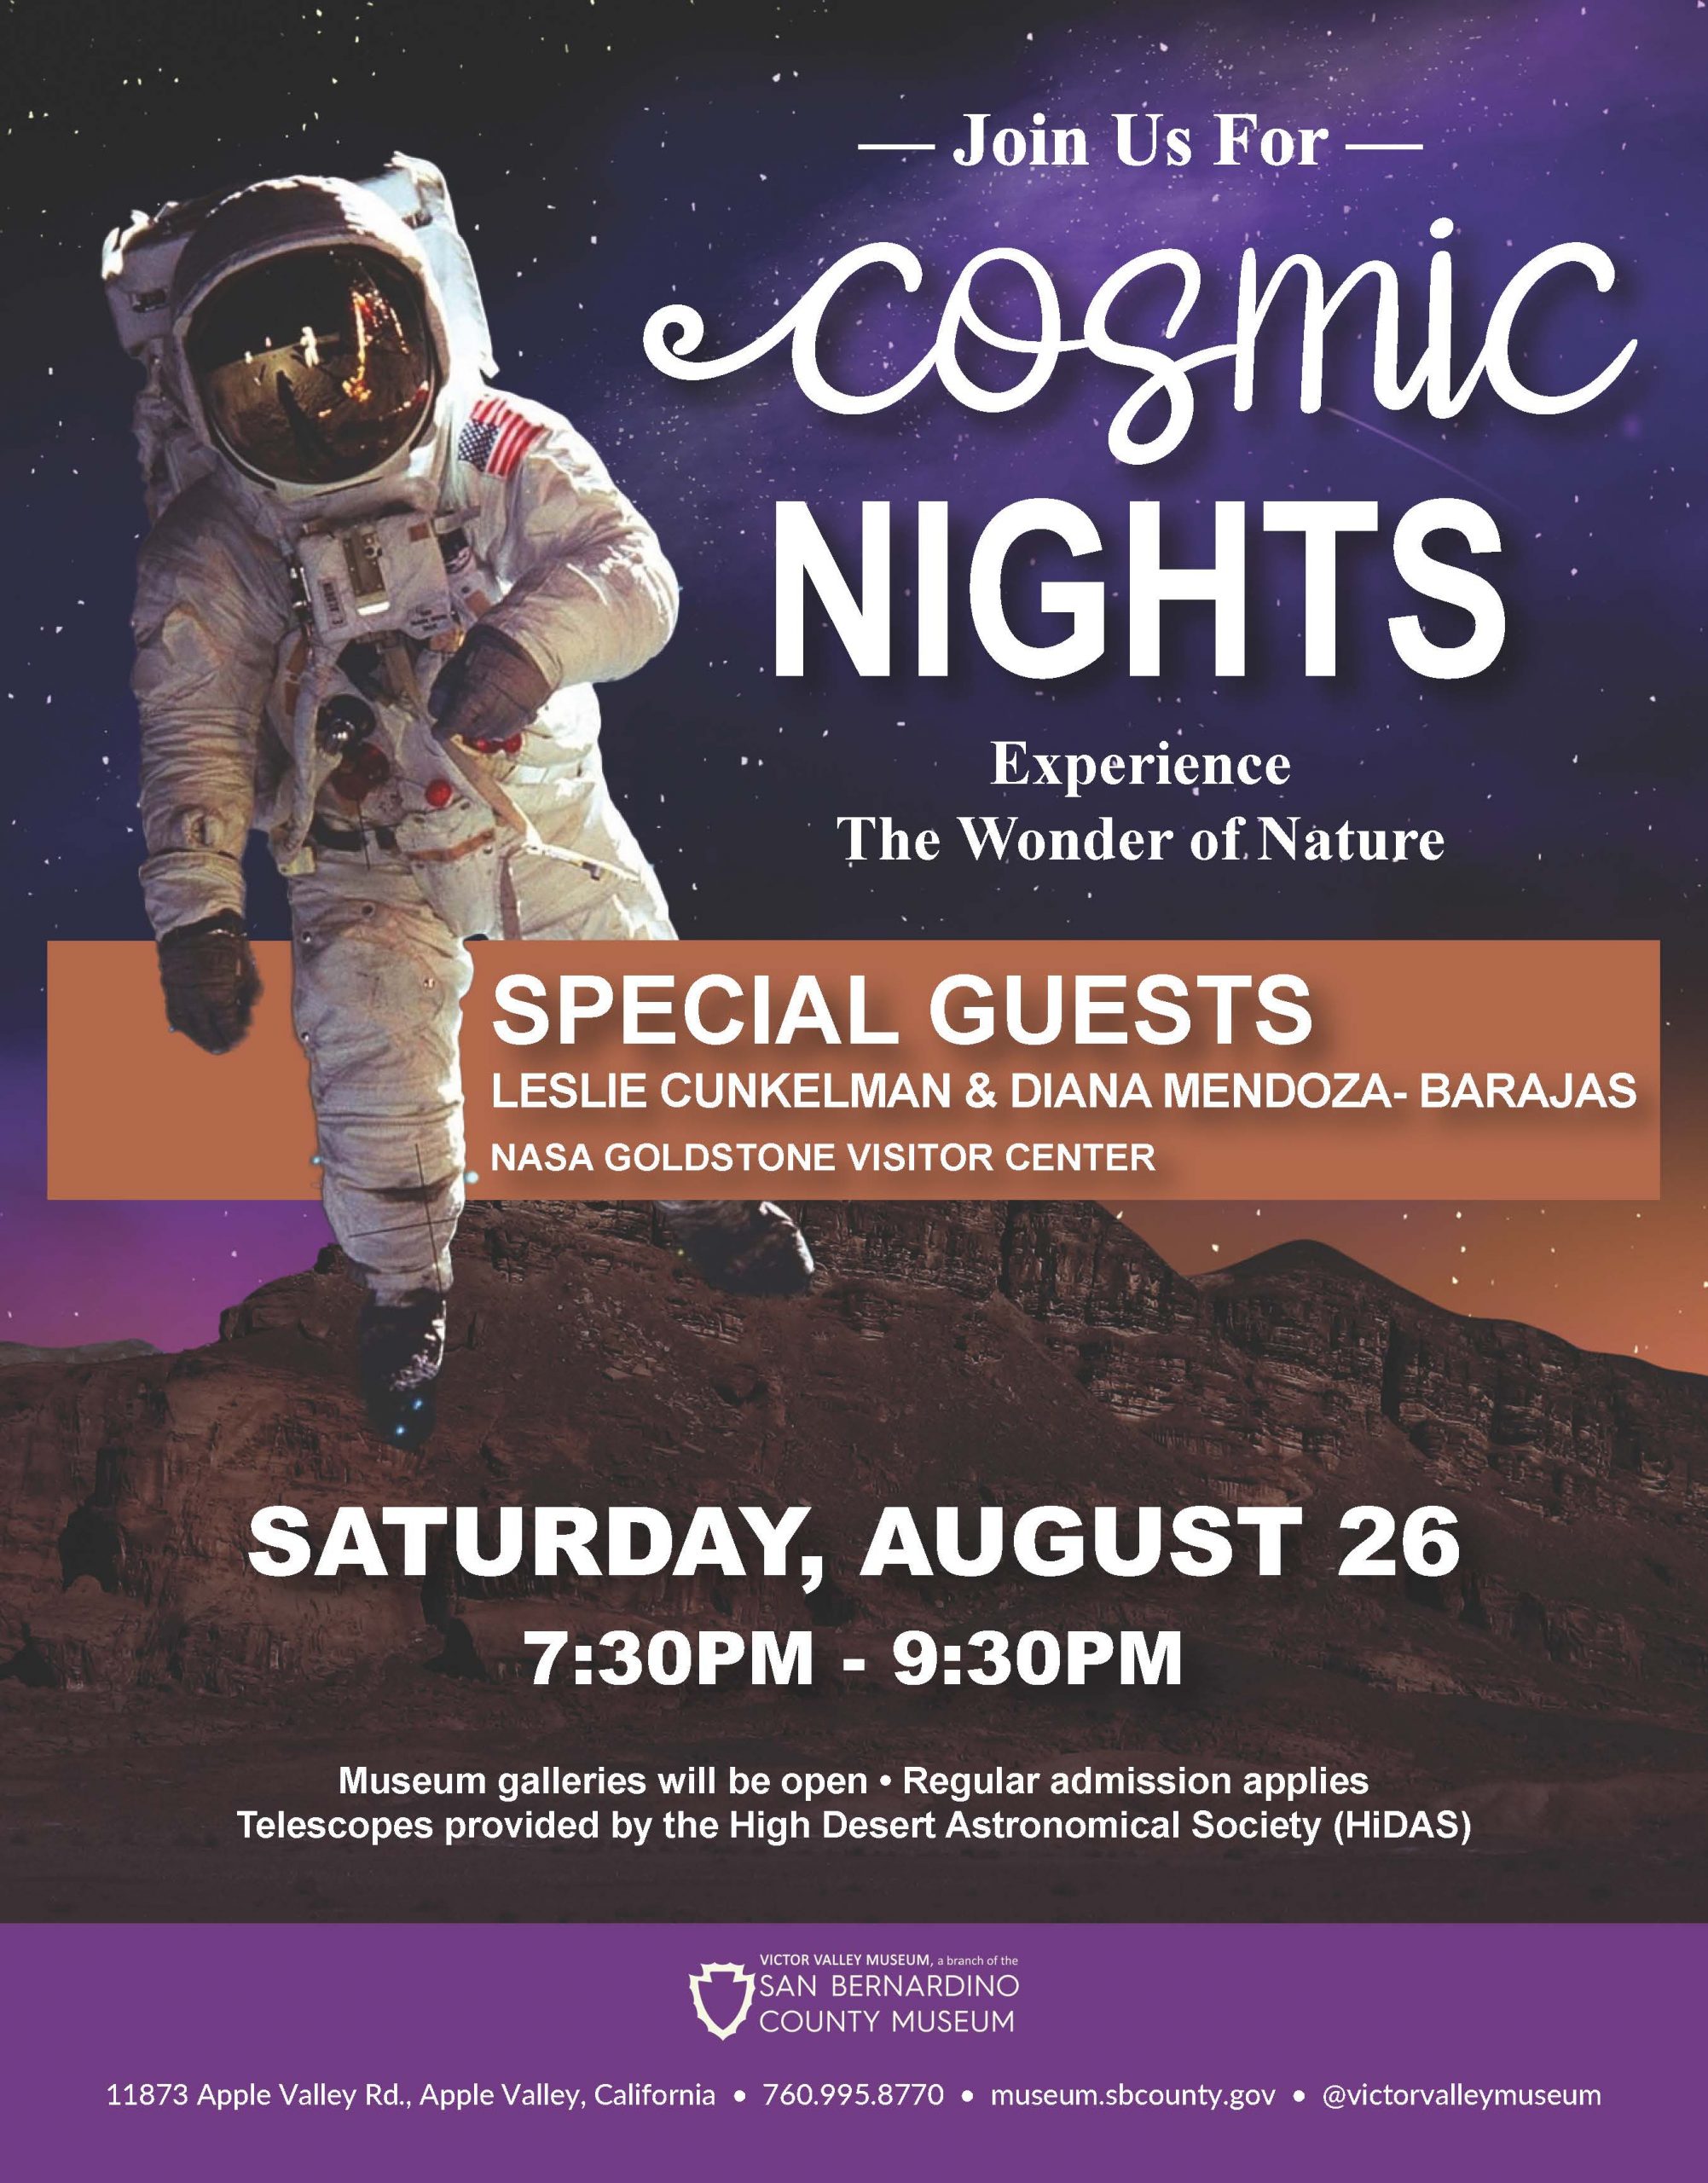 Victor Valley Museum hosts Cosmic Nights event with guests from NASA Goldstone Complex